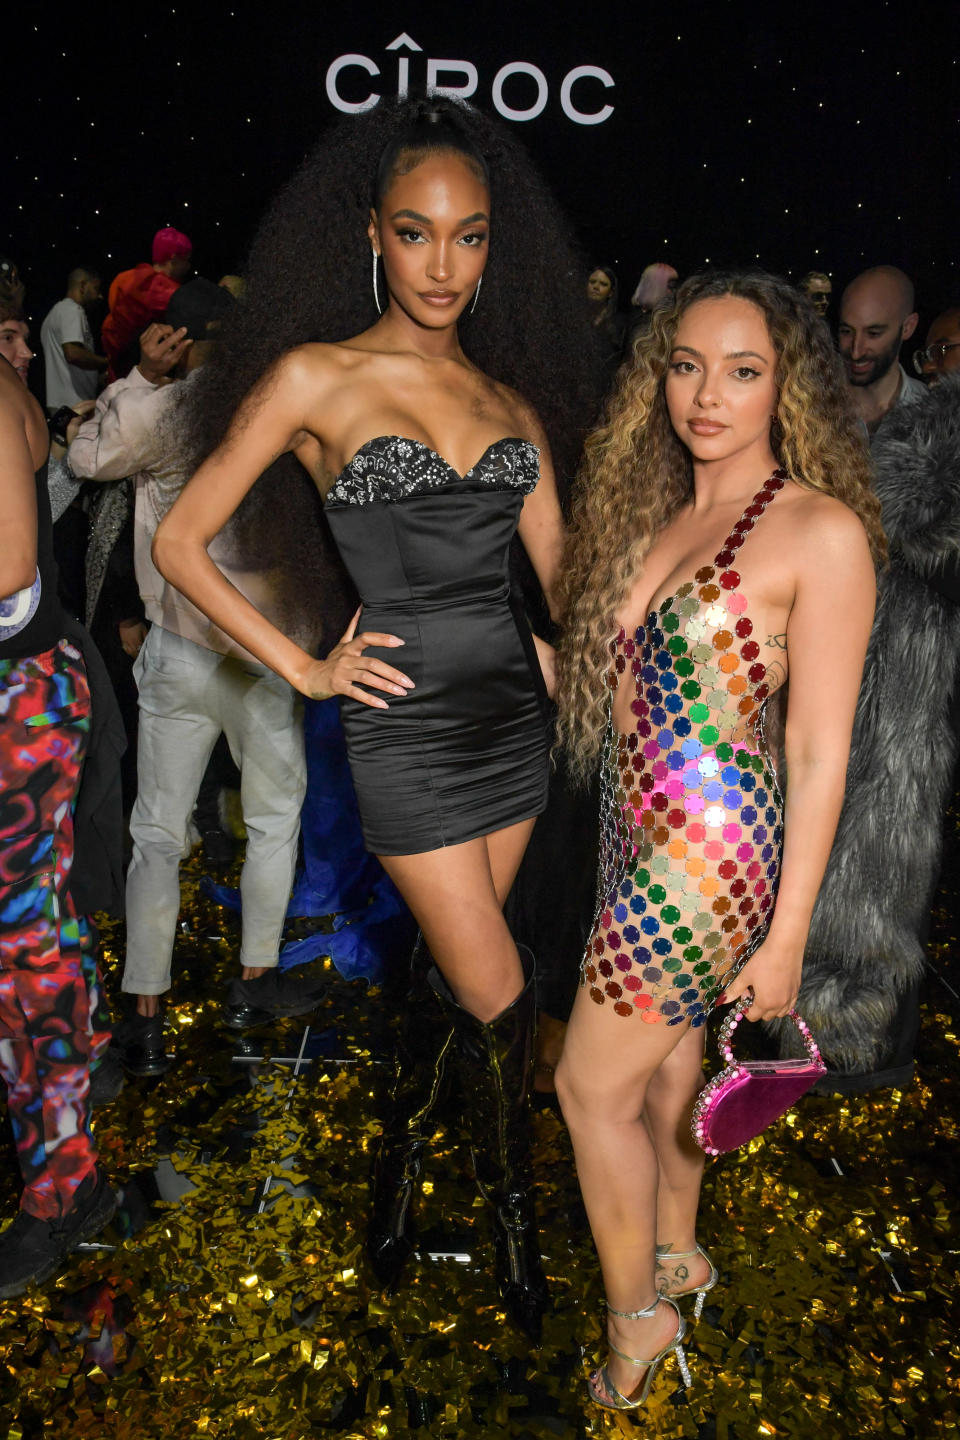 Jourdan Dunn and Jade Thirlwall attend the Cîroc Iconic Ball in support of Not a Phase at Koko. - Credit: Dave Benett/Getty Images for CÎROC